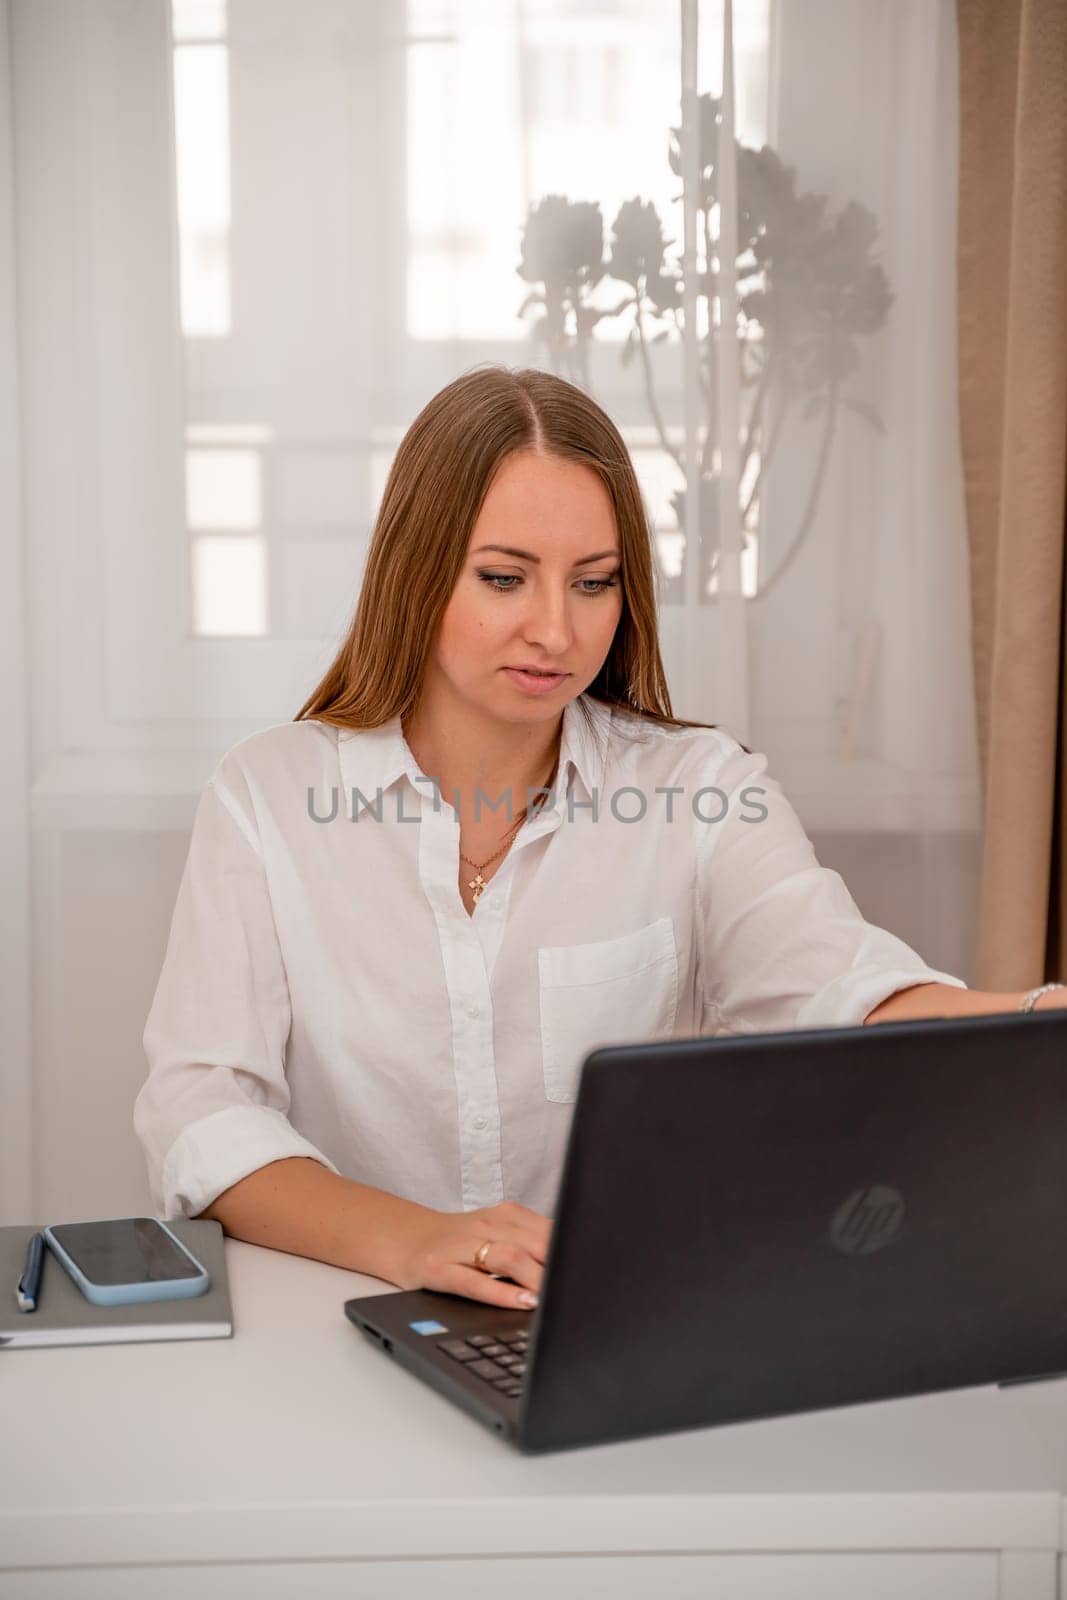 European professional woman is sitting with a laptop at a table in a home office, a positive woman is studying while working on a PC. She is wearing a beige jacket and jeans and is on the phone. by Matiunina